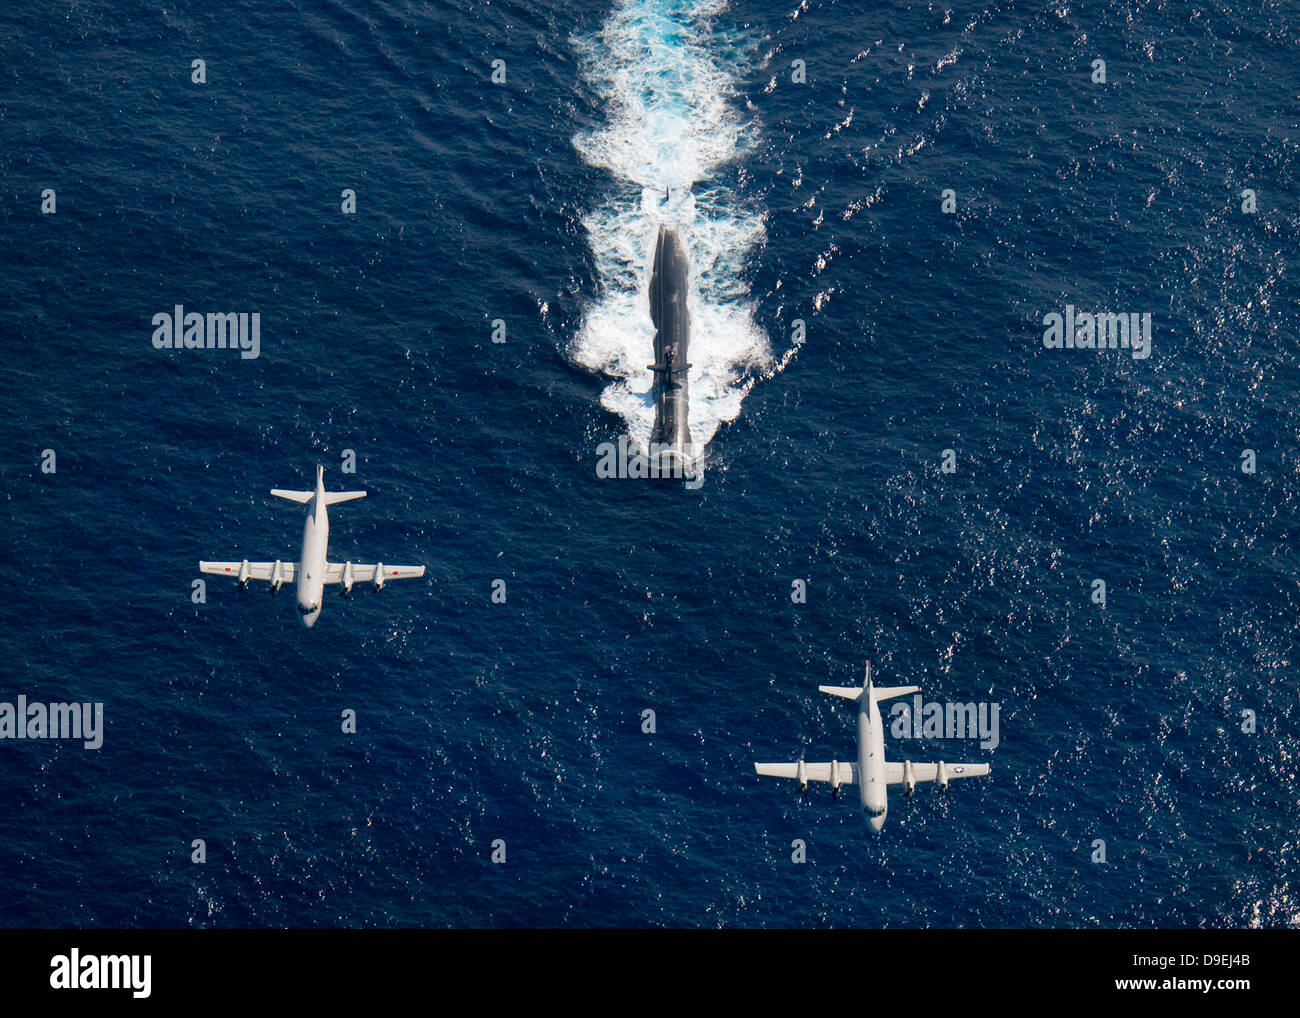 Two P-3 Orion maritime surveillance aircraft fly over attack submarine USS Houston. Stock Photo